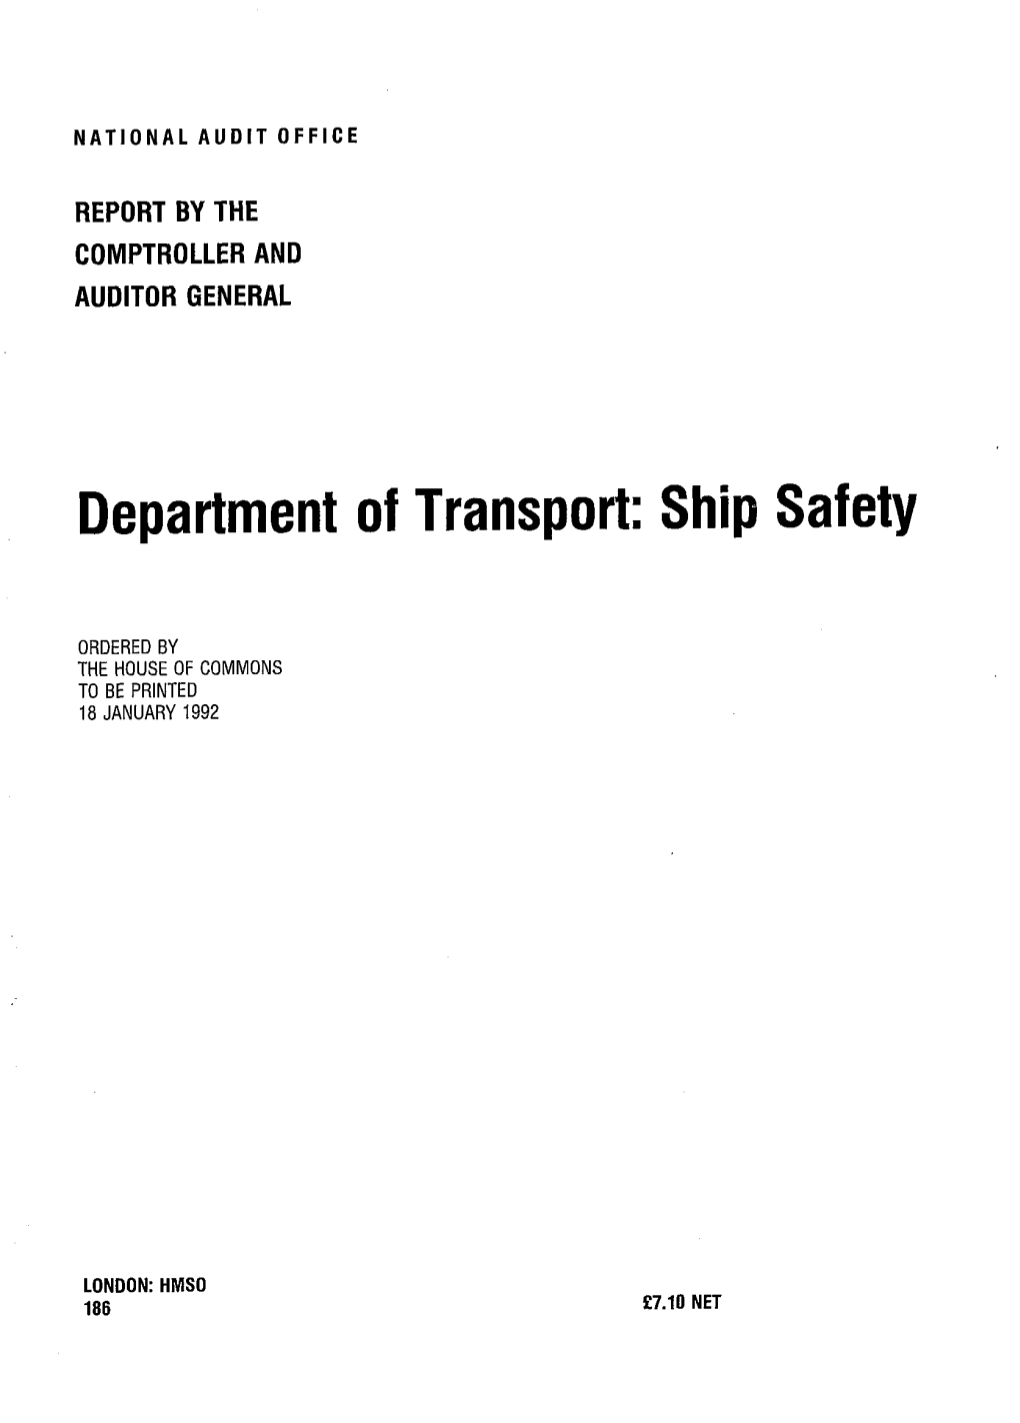 Department of Transport: Ship Safety